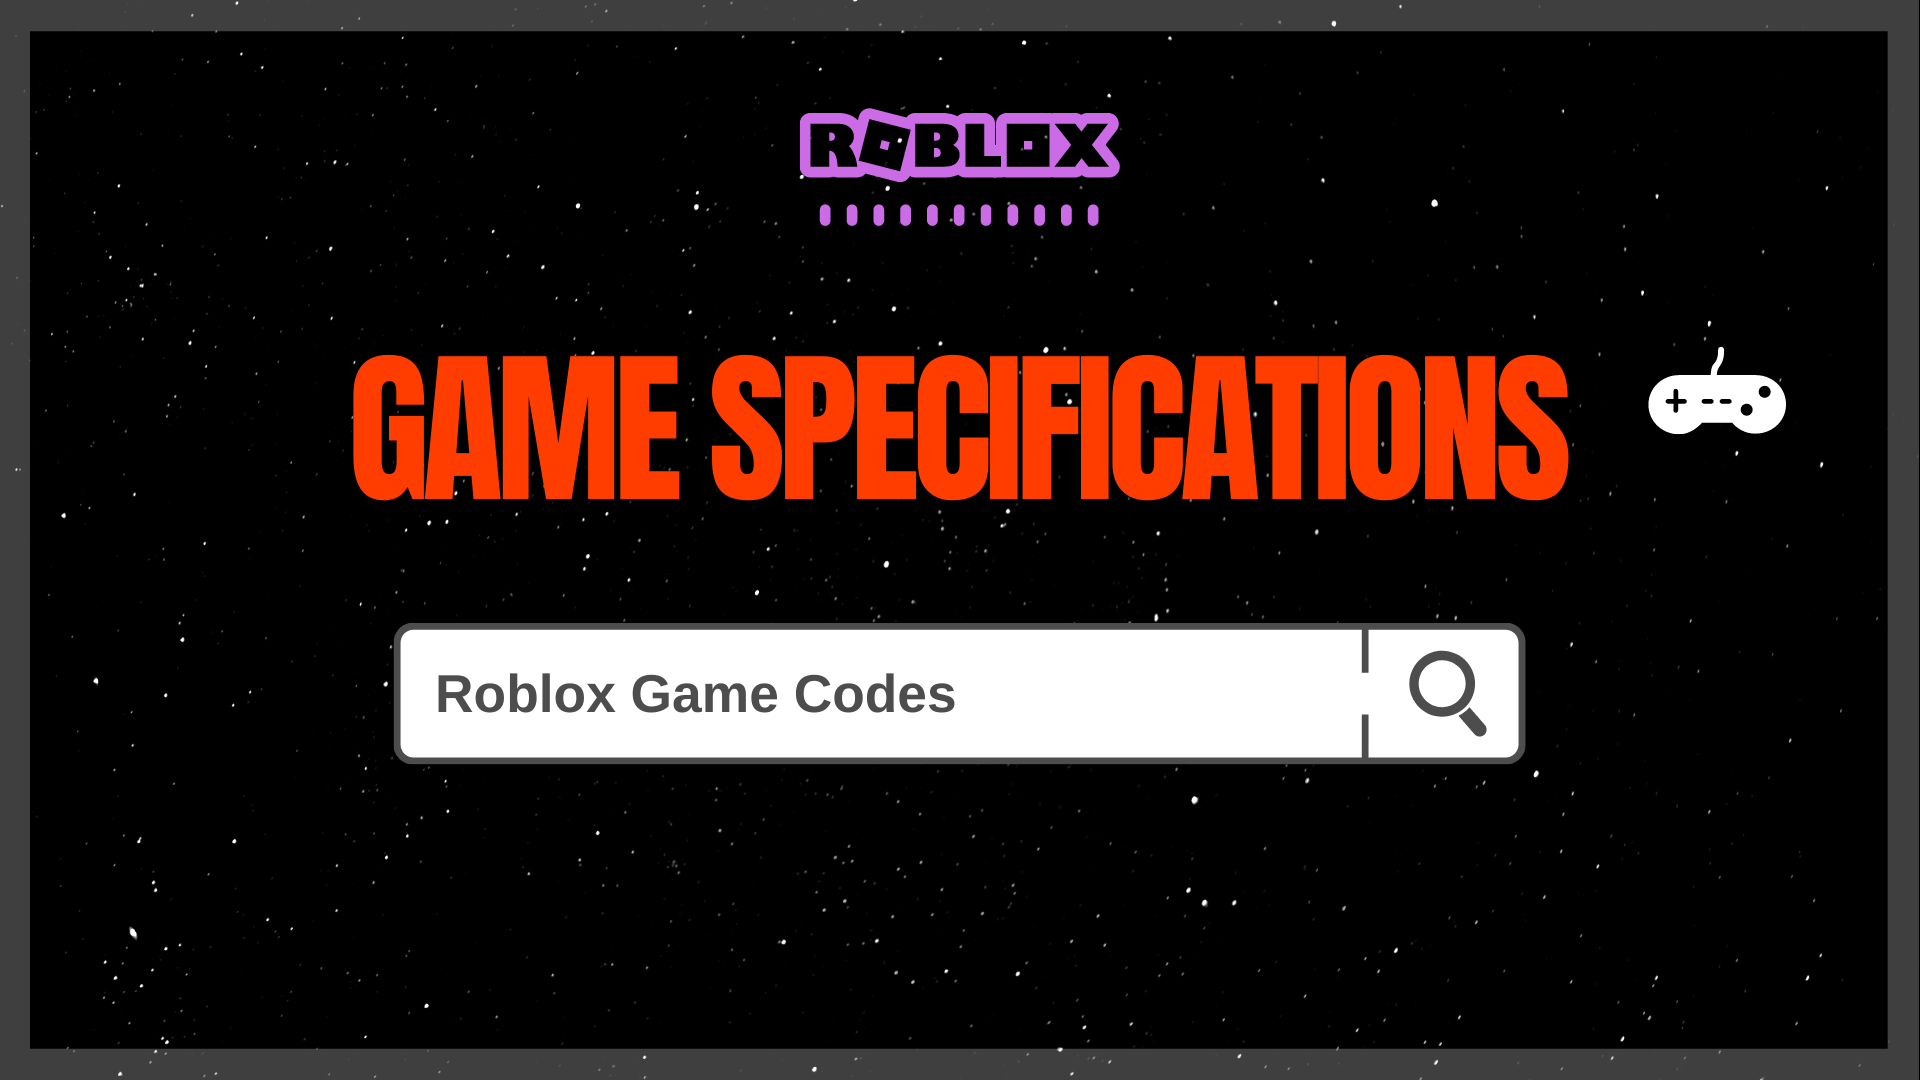 All In One Roblox Game Codes ᐈ Encylopedia Game Specifications - case clicker roblox item values